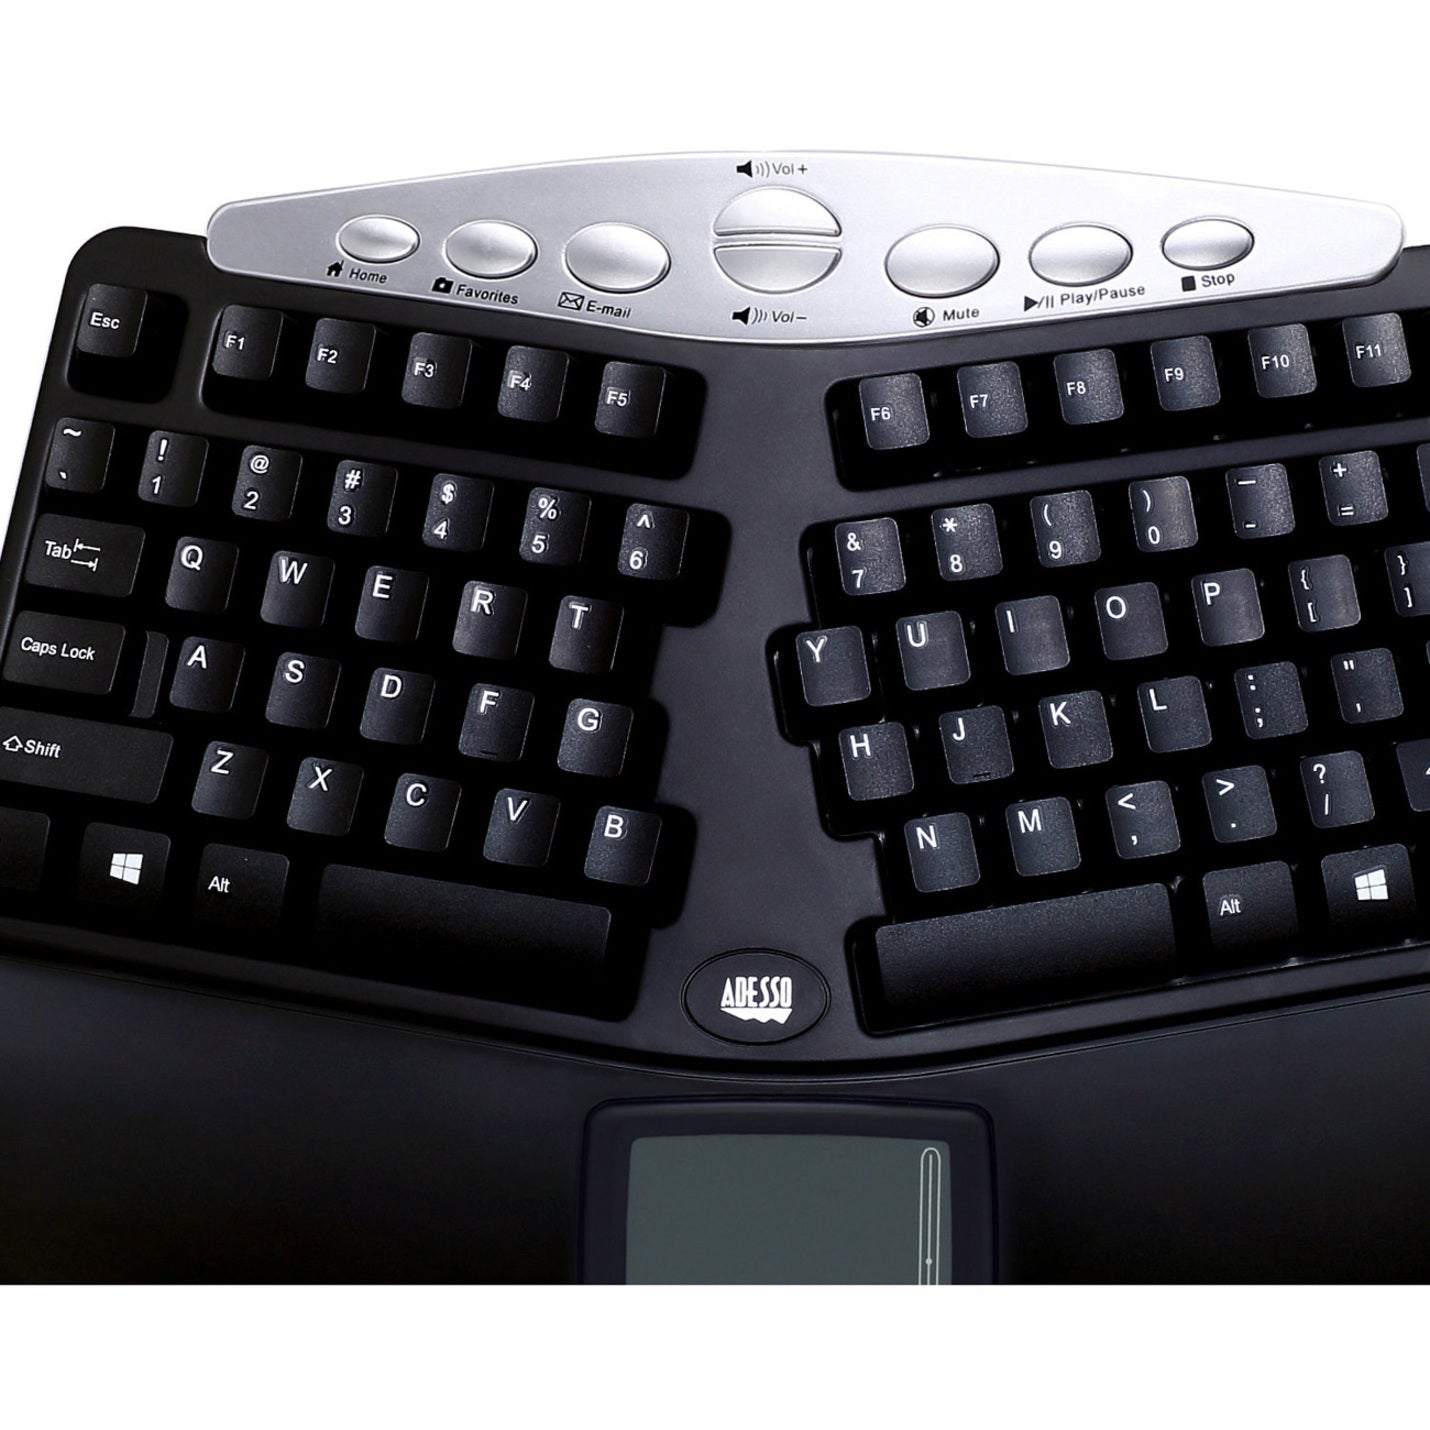 Adesso PCK-308UB Tru-Form Contoured Ergonomic Keyboard with Built-In Touchpad, USB Cable, Quiet Keys, Split Layout, Wrist Rest